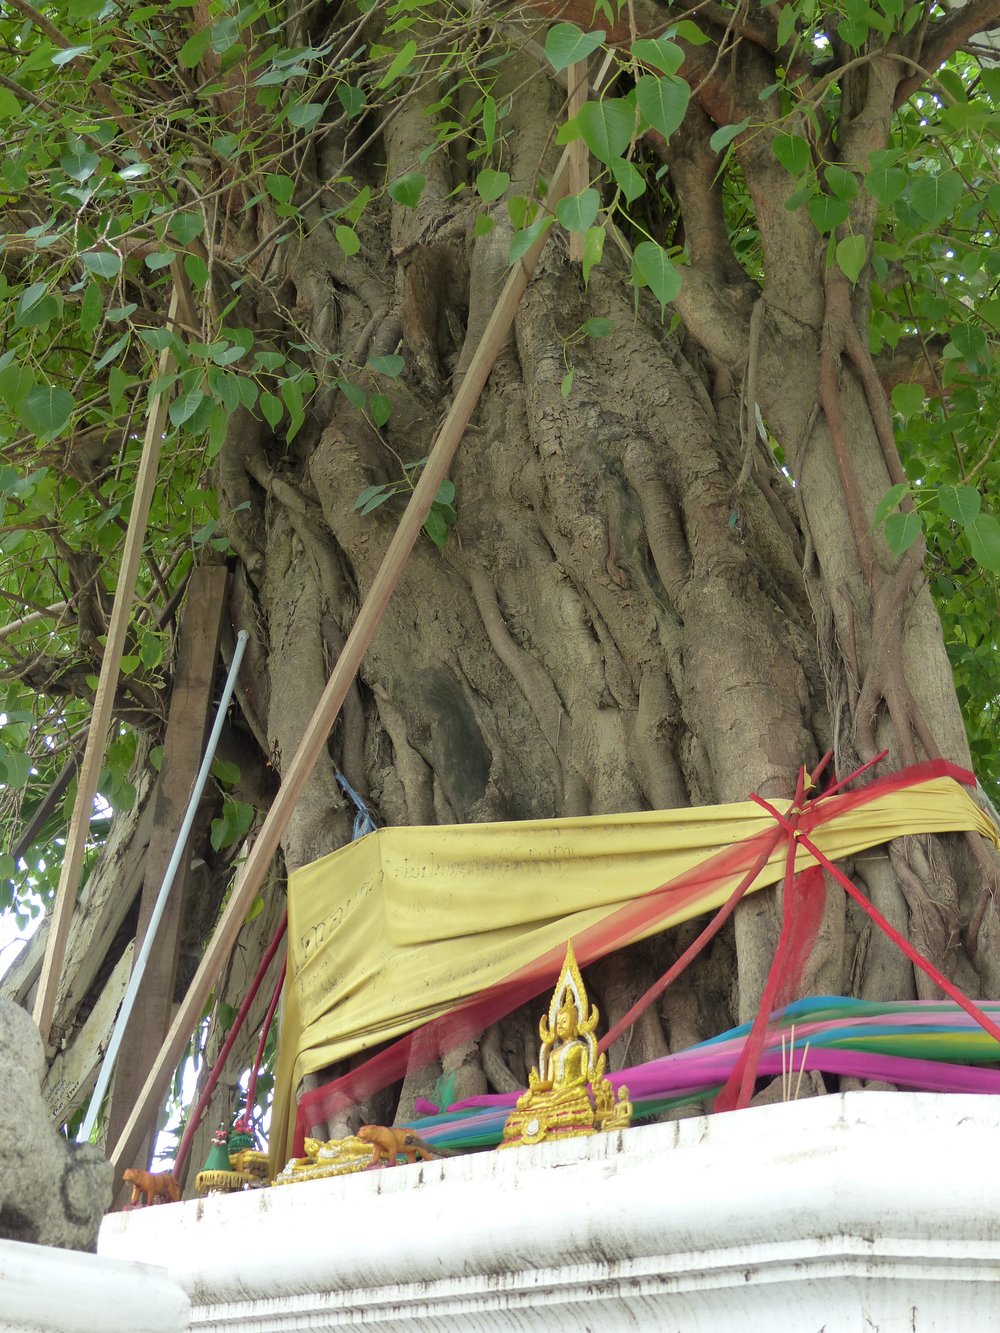 Tree descended from the bodhi tree under which Buddha achieved enlightenment